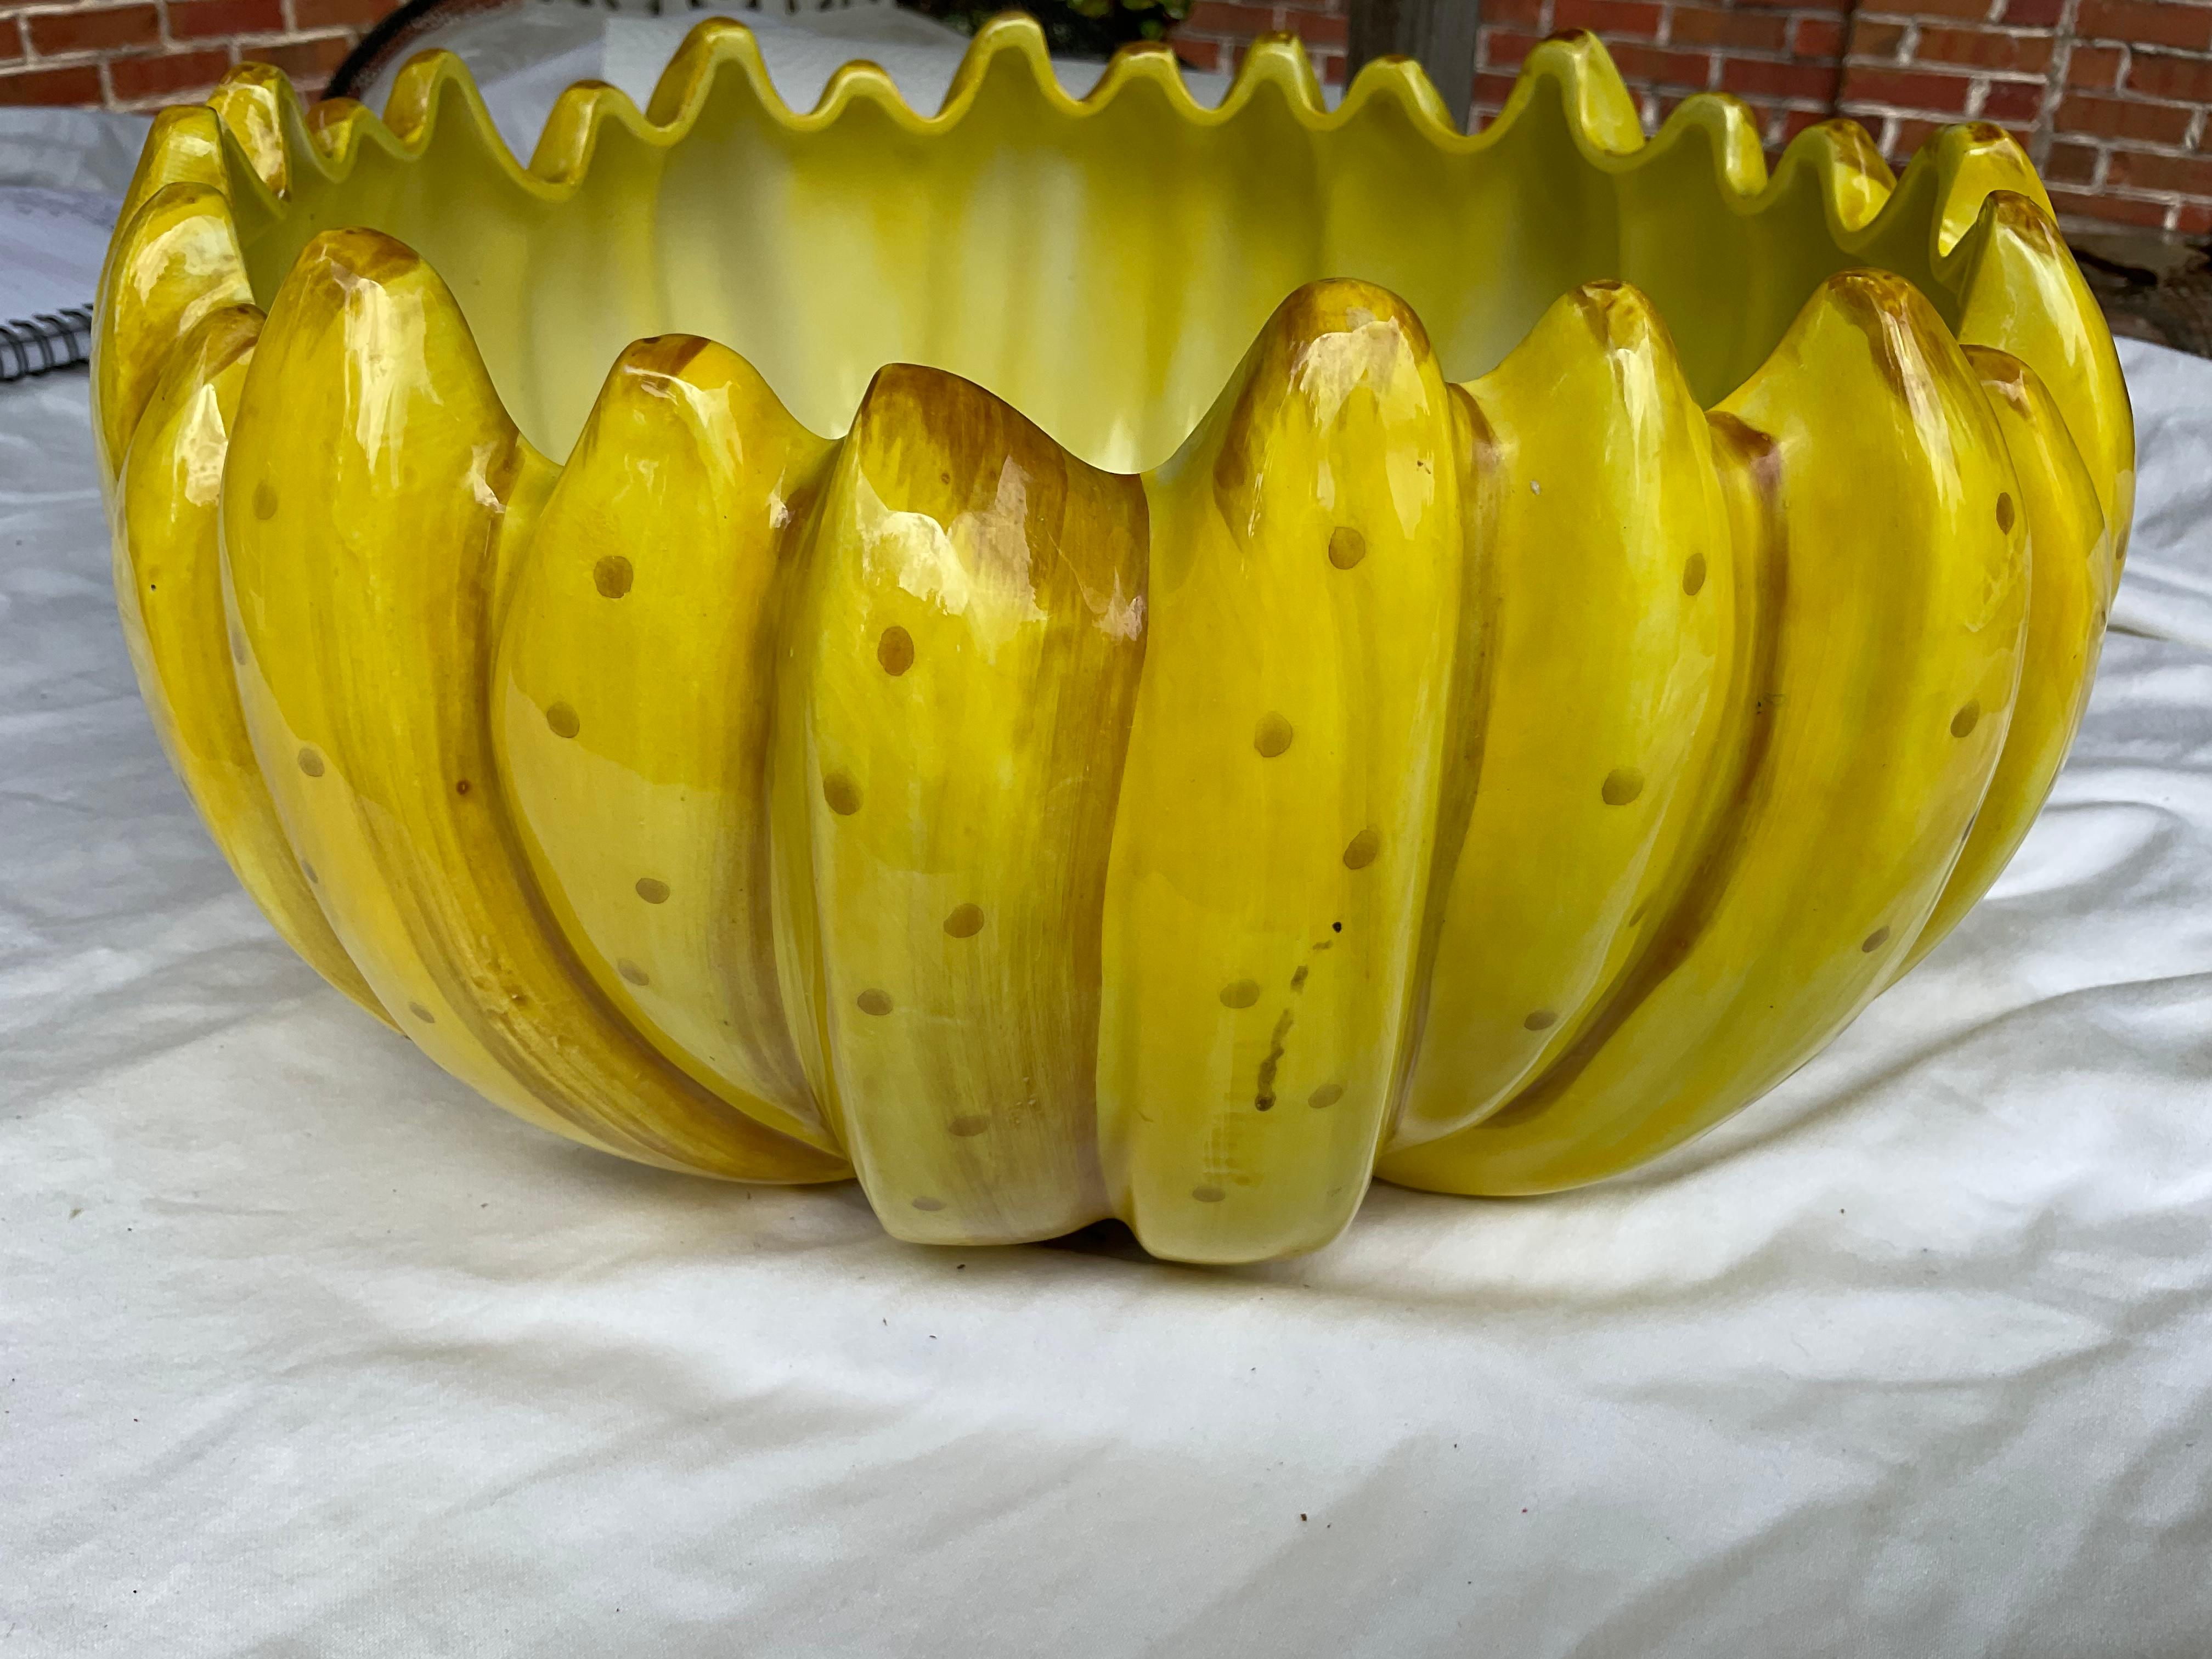 Other 1988 Fitz & Floyd Banana Bowl Centerpiece For Sale